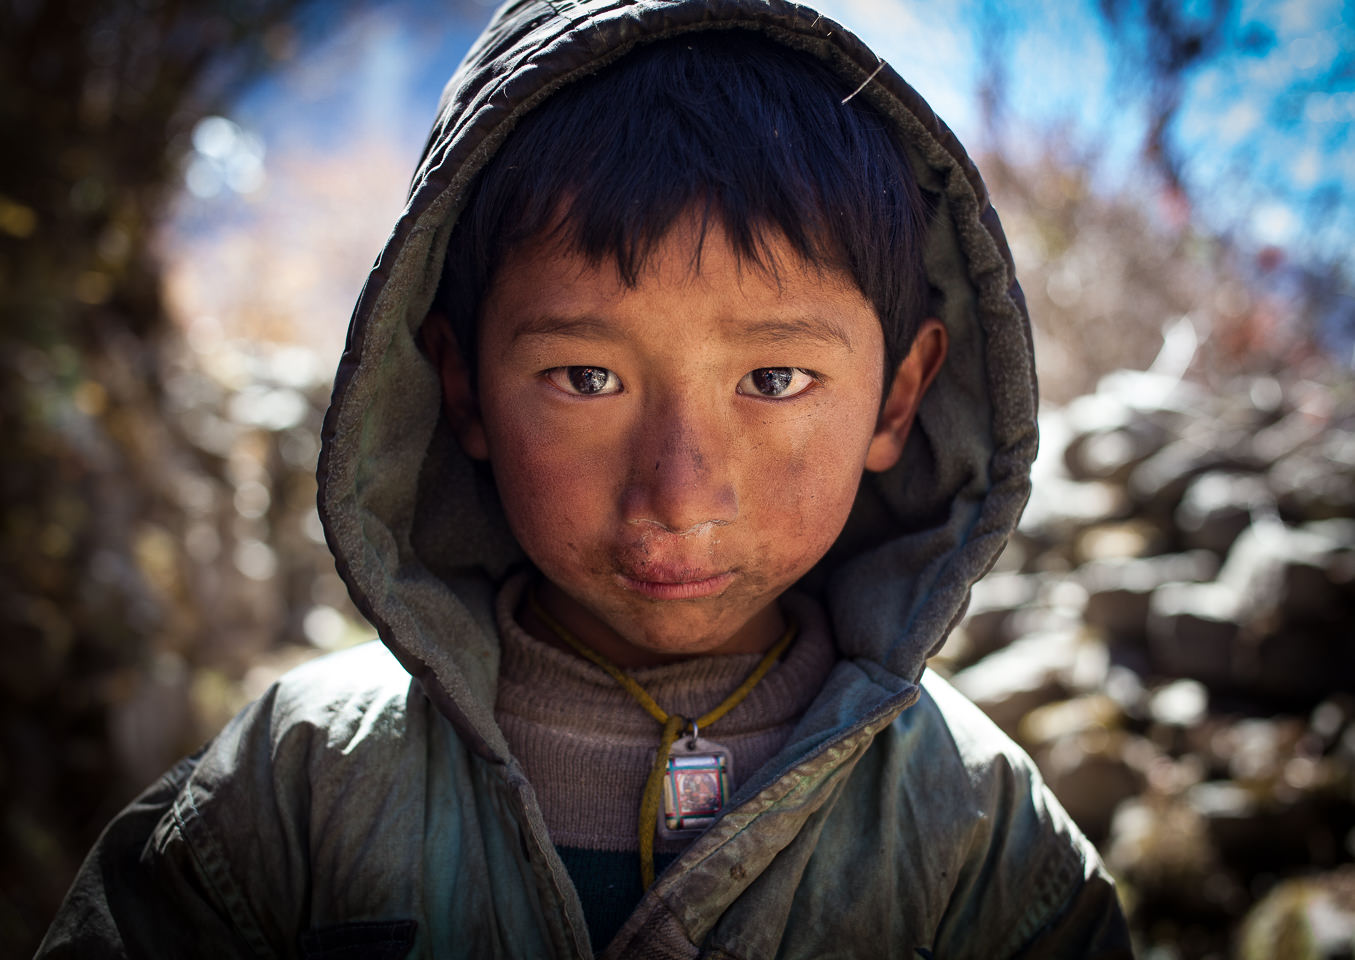 A young Tibetan boy stares into the camera with curiosity.